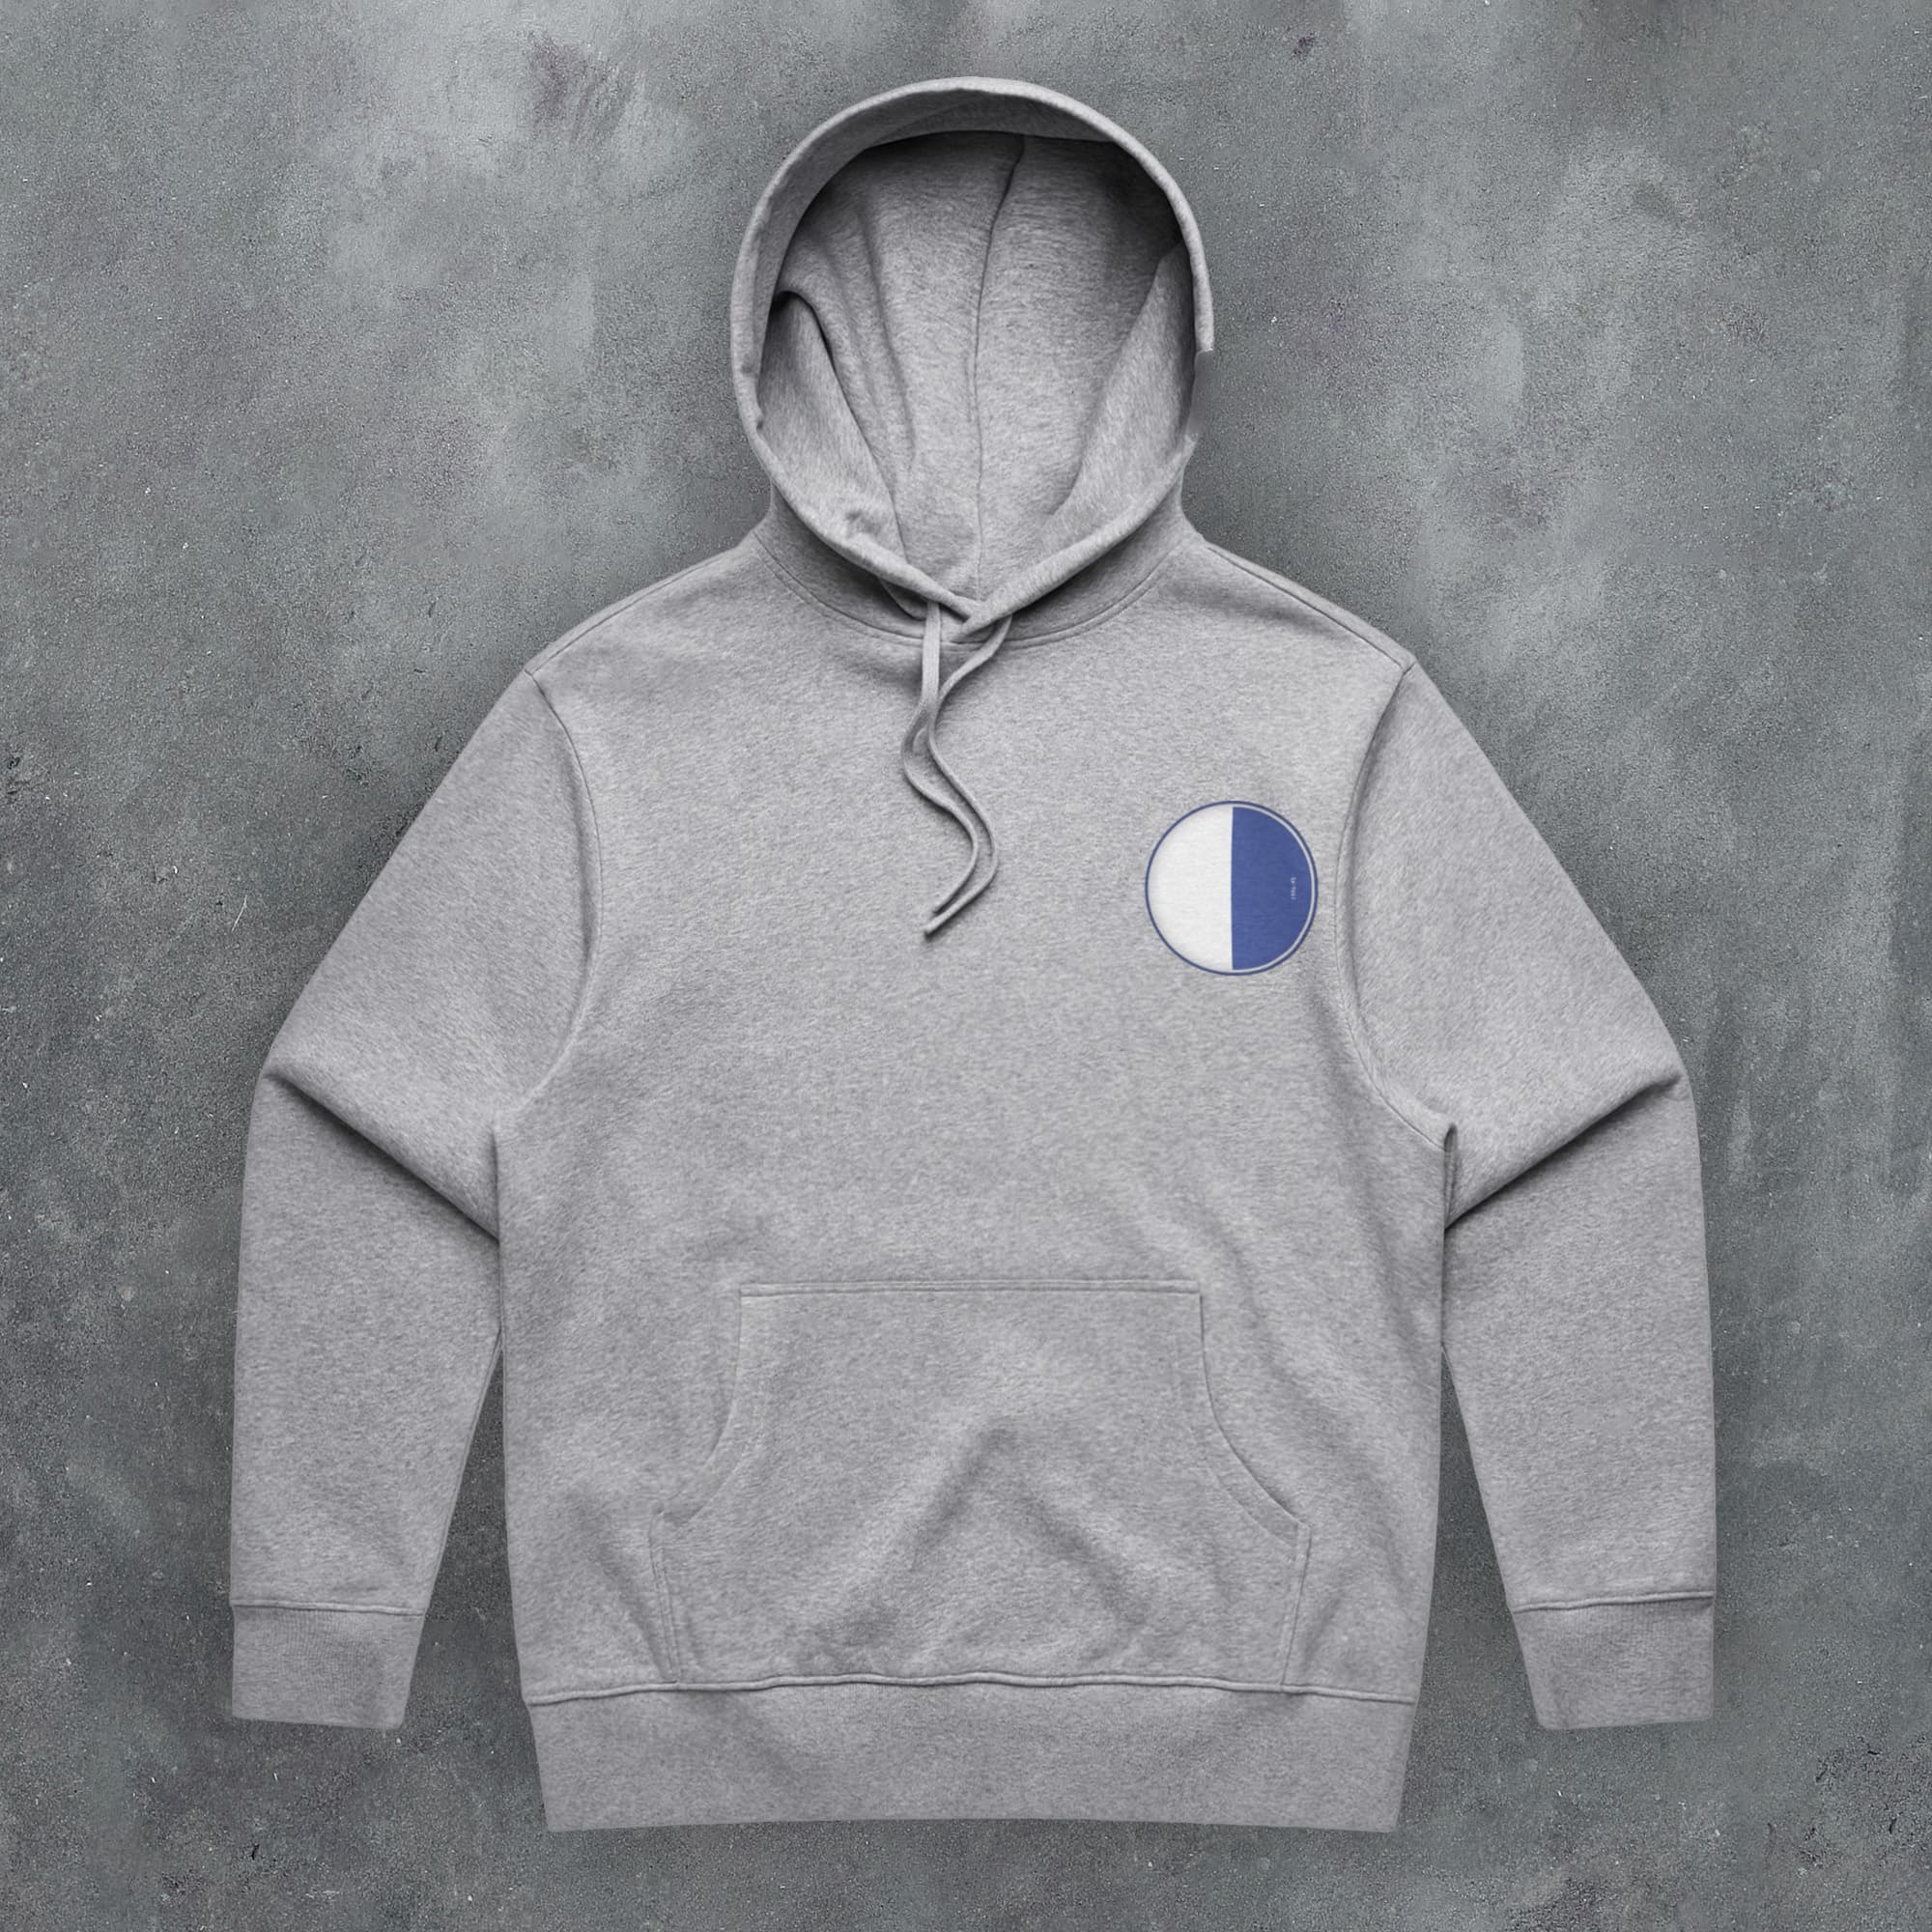 a grey hoodie with a blue and white patch on it